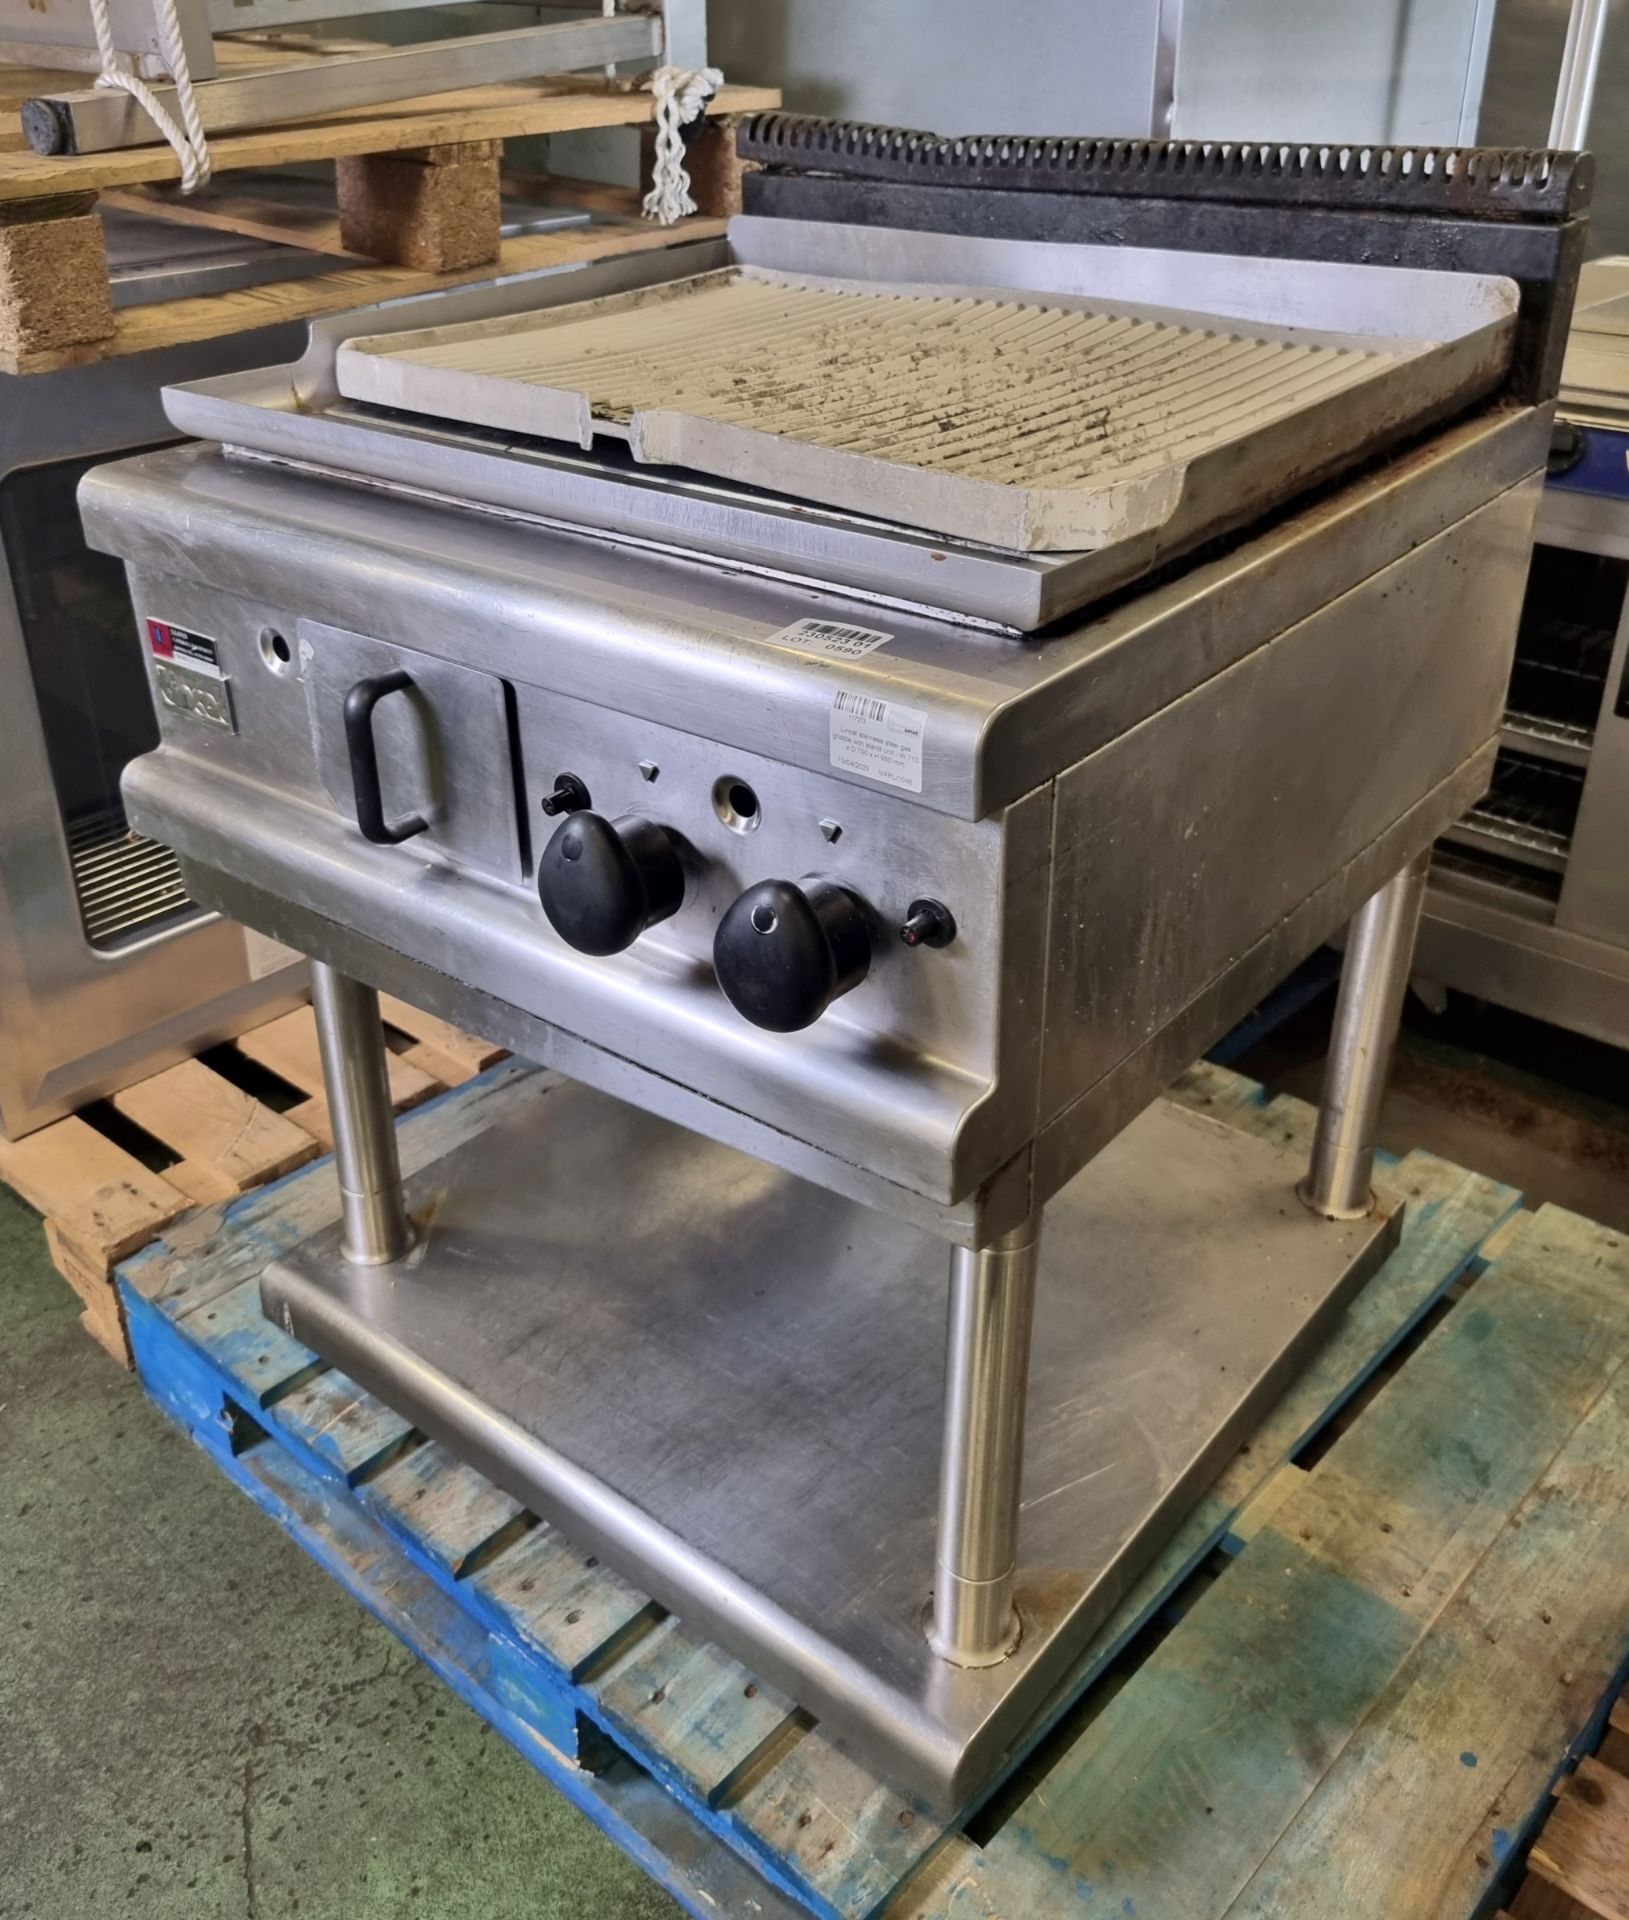 Lincat stainless steel gas griddle with stand unit - W 710 x D 700 x H 980 mm - Image 3 of 6